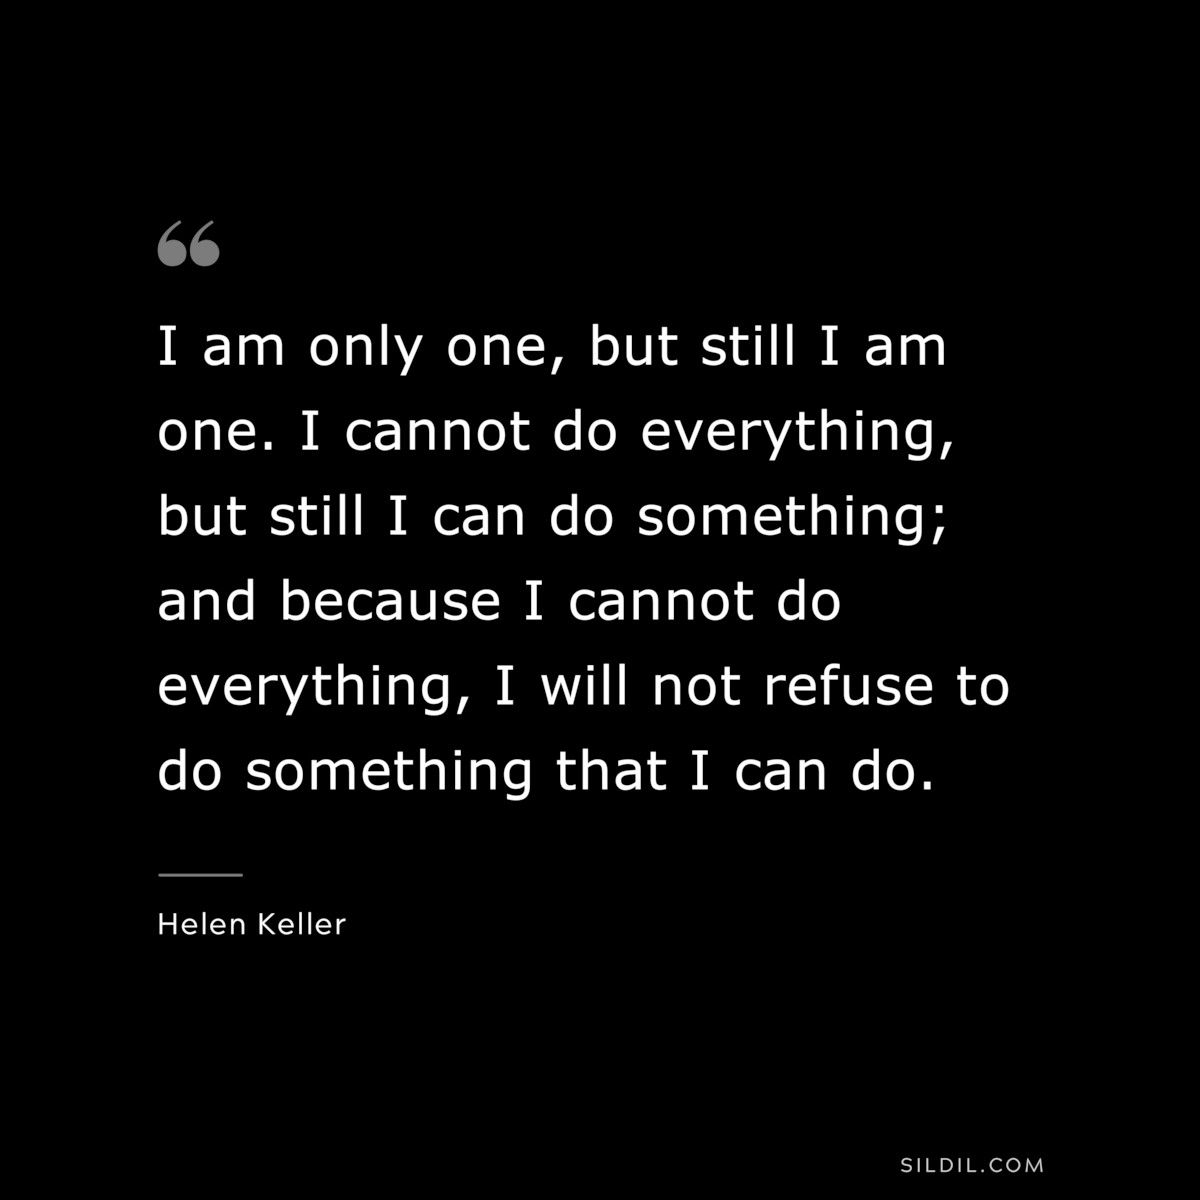 I am only one, but still I am one. I cannot do everything, but still I can do something; and because I cannot do everything, I will not refuse to do something that I can do. ― Helen Keller